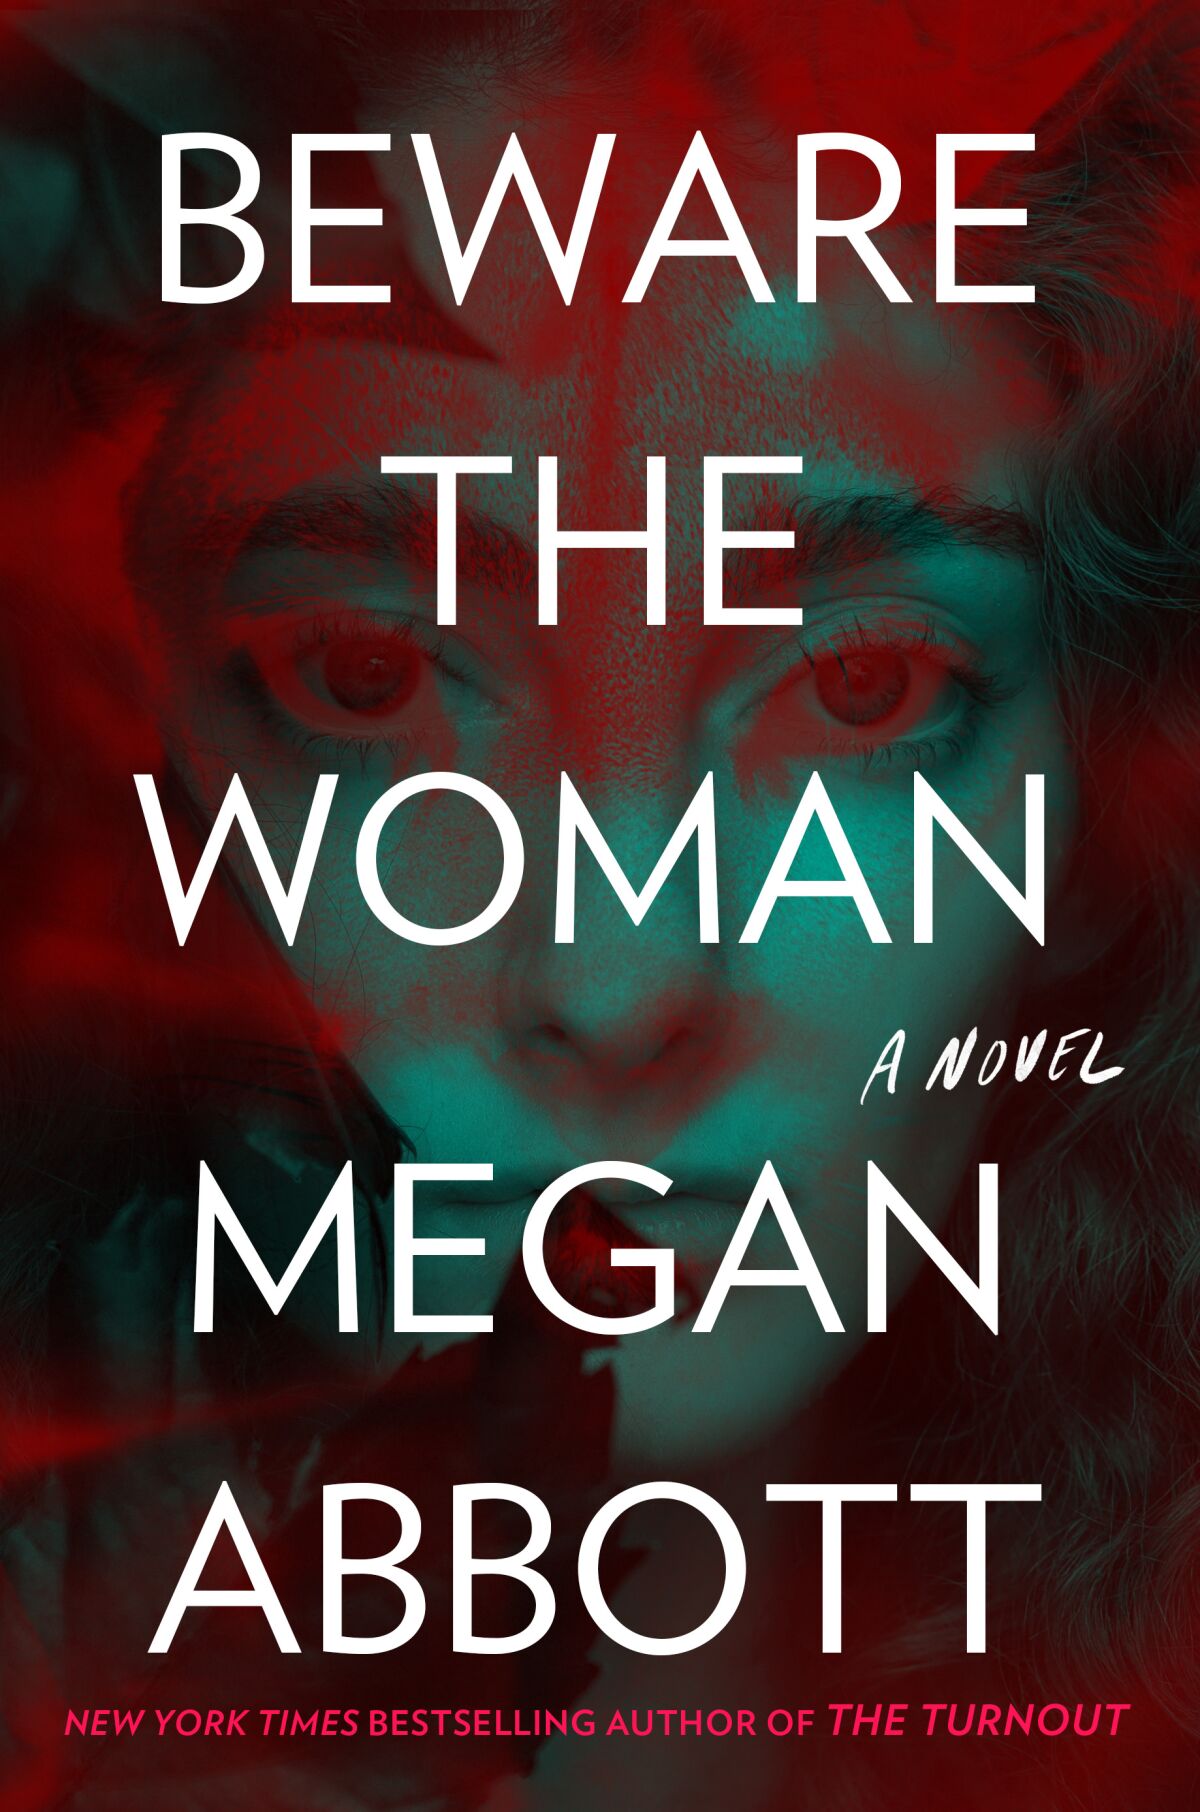 book cover for "Beware the Woman" 